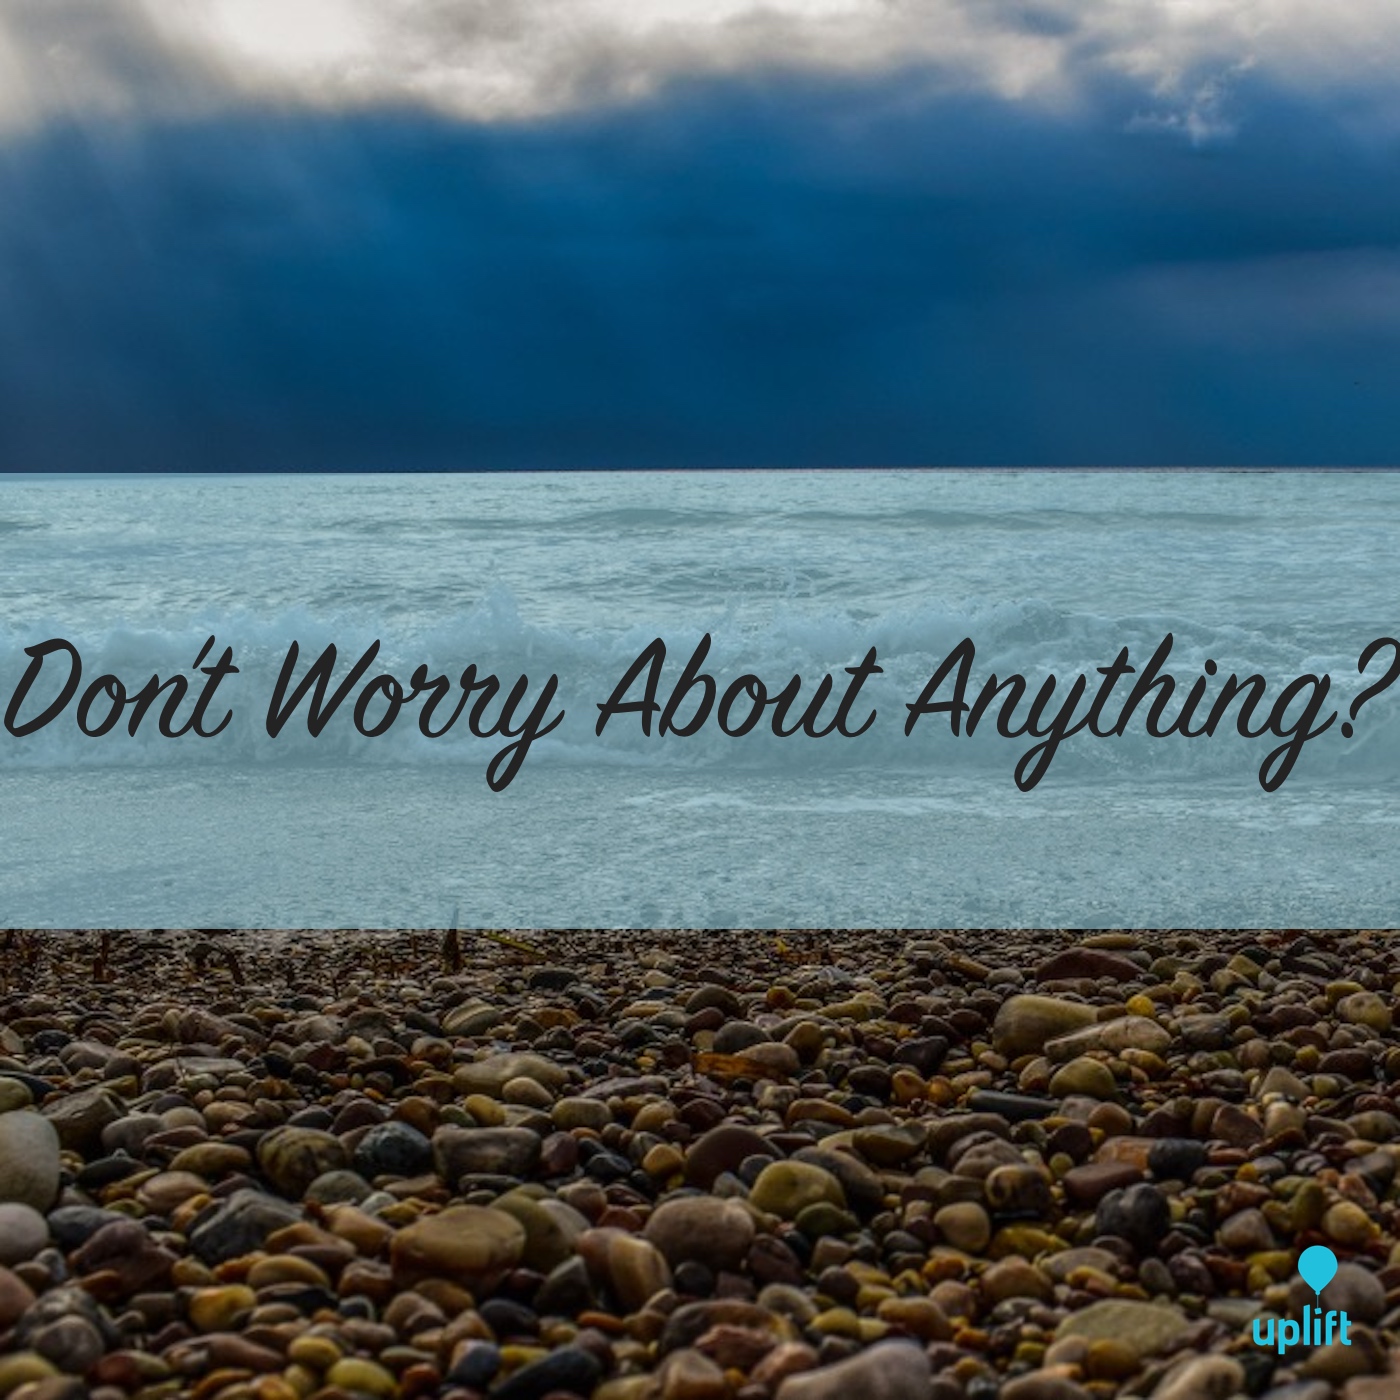 Episode 19: Do Not Worry About Anything?